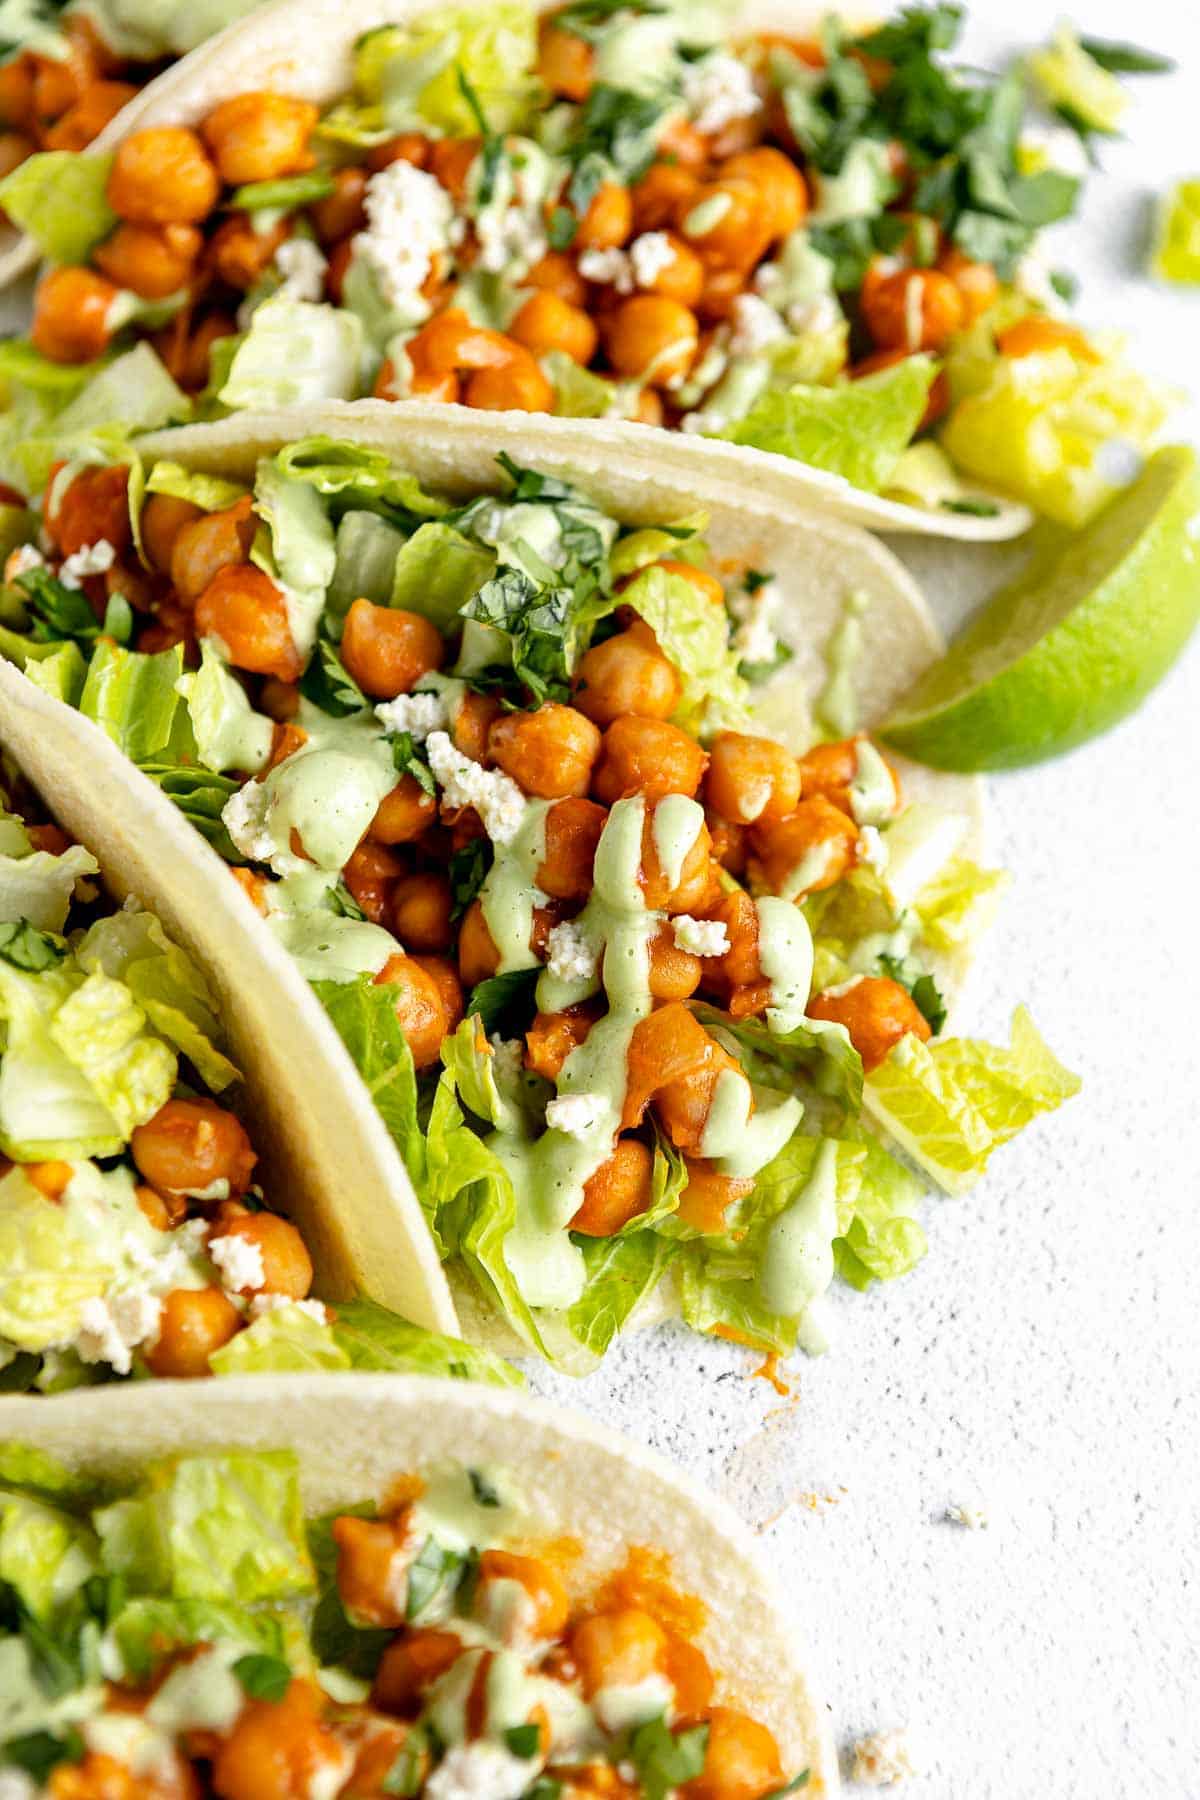 LUTEAL PHASE RECIPE: CHICKPEA TACOS WITH AVOCADO SAUCE – Marea